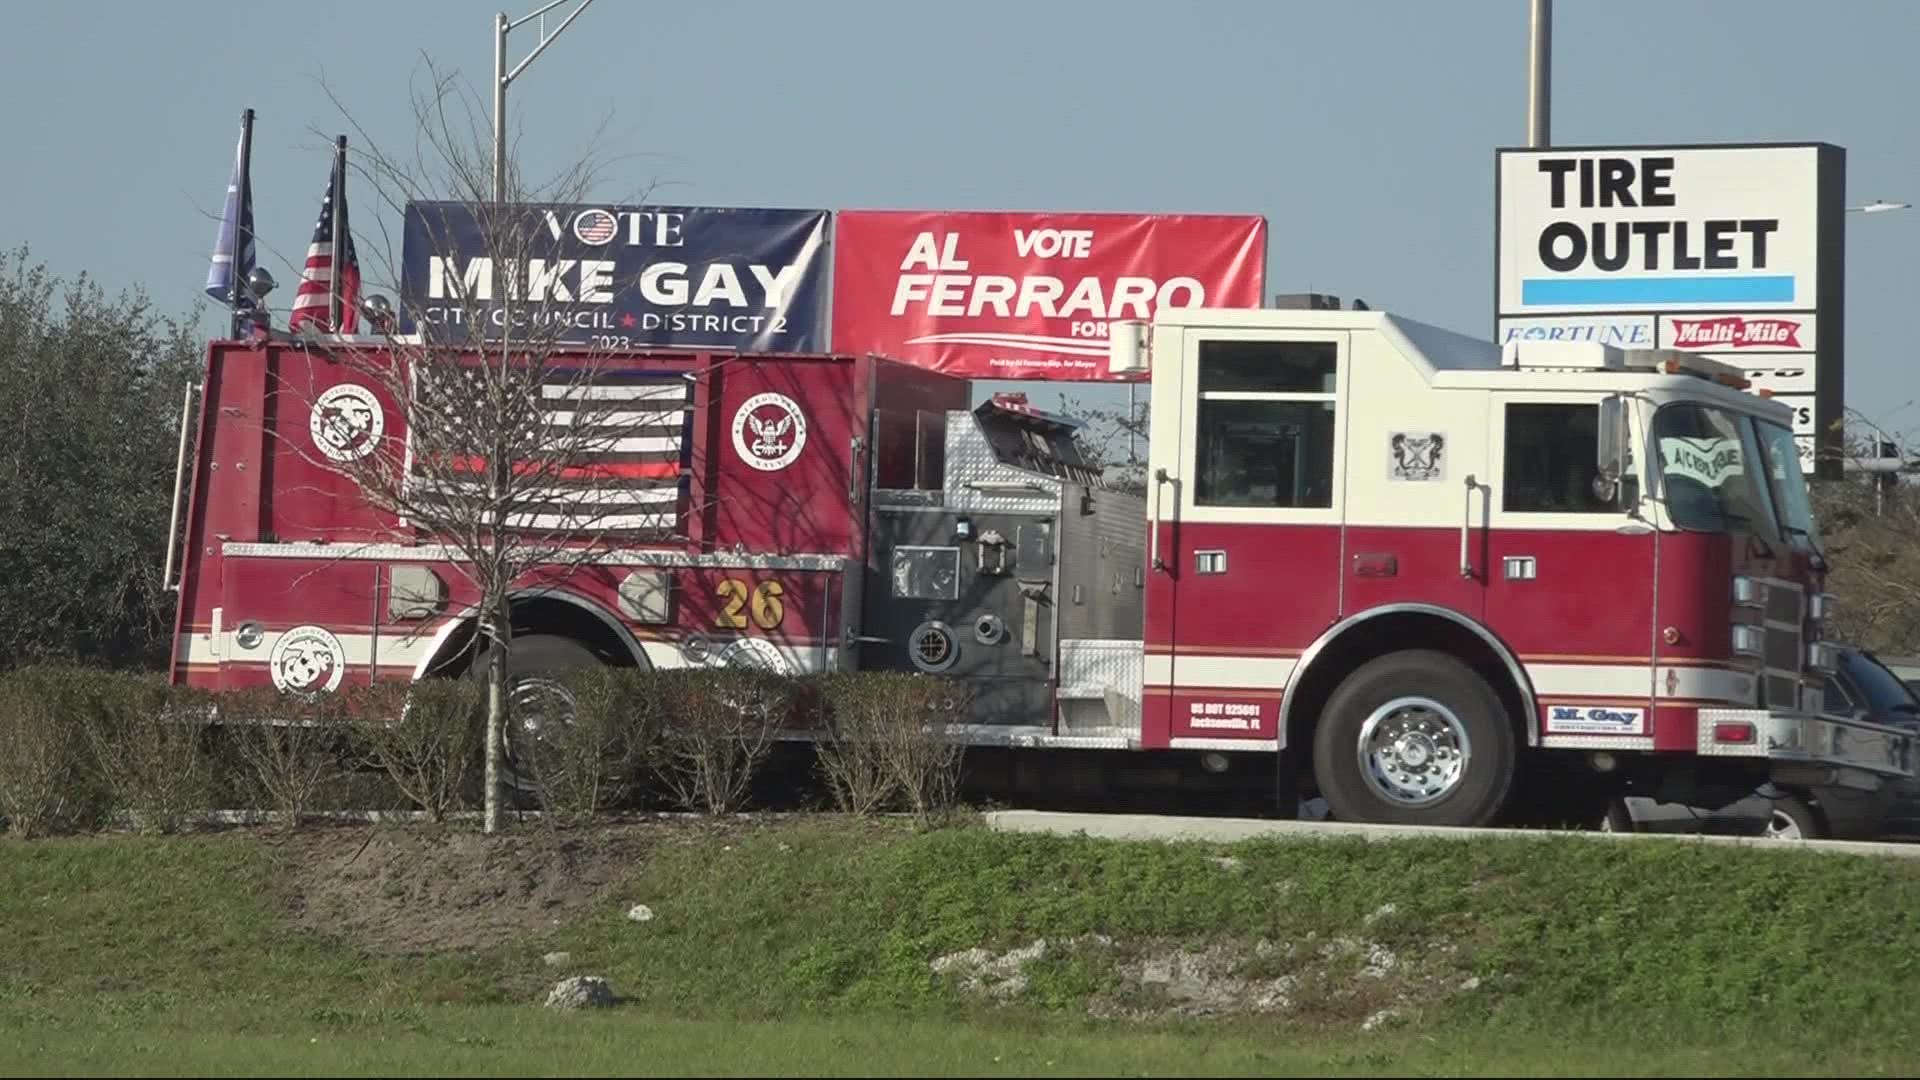 erry Bork sent us a photo of a fire truck sitting in the parking lot of a tire store on Merrill Road with multiple campaign signs.